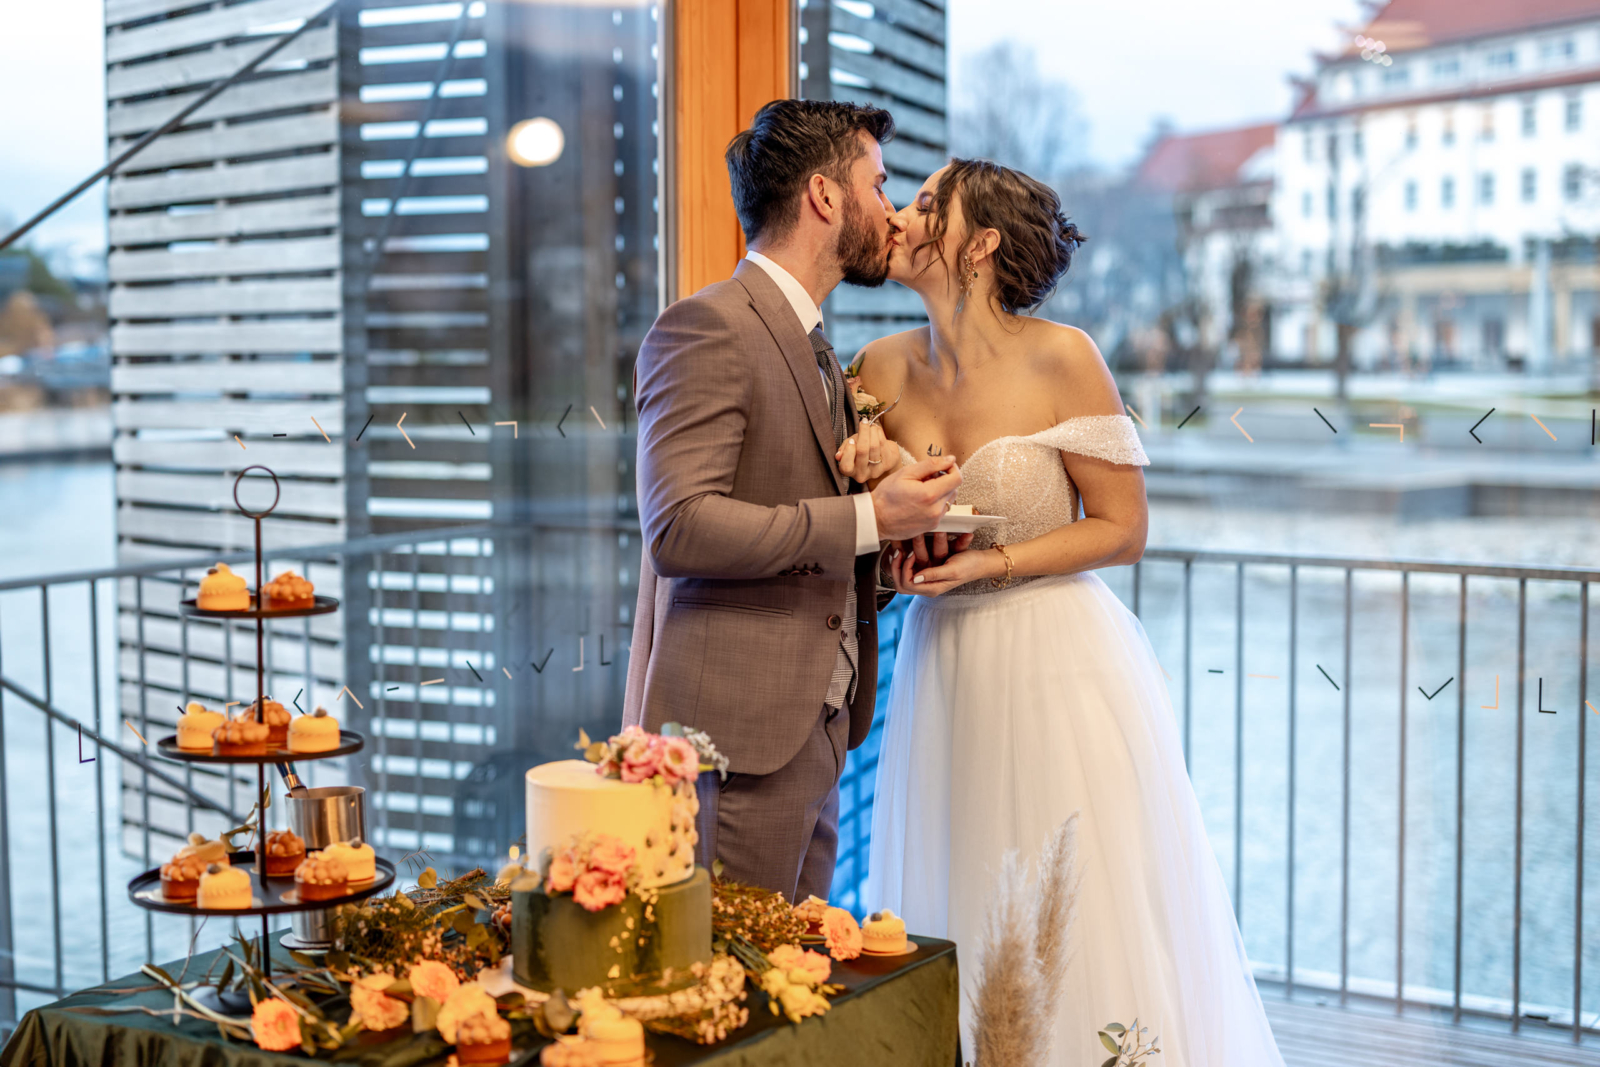 kiss by the sweet table